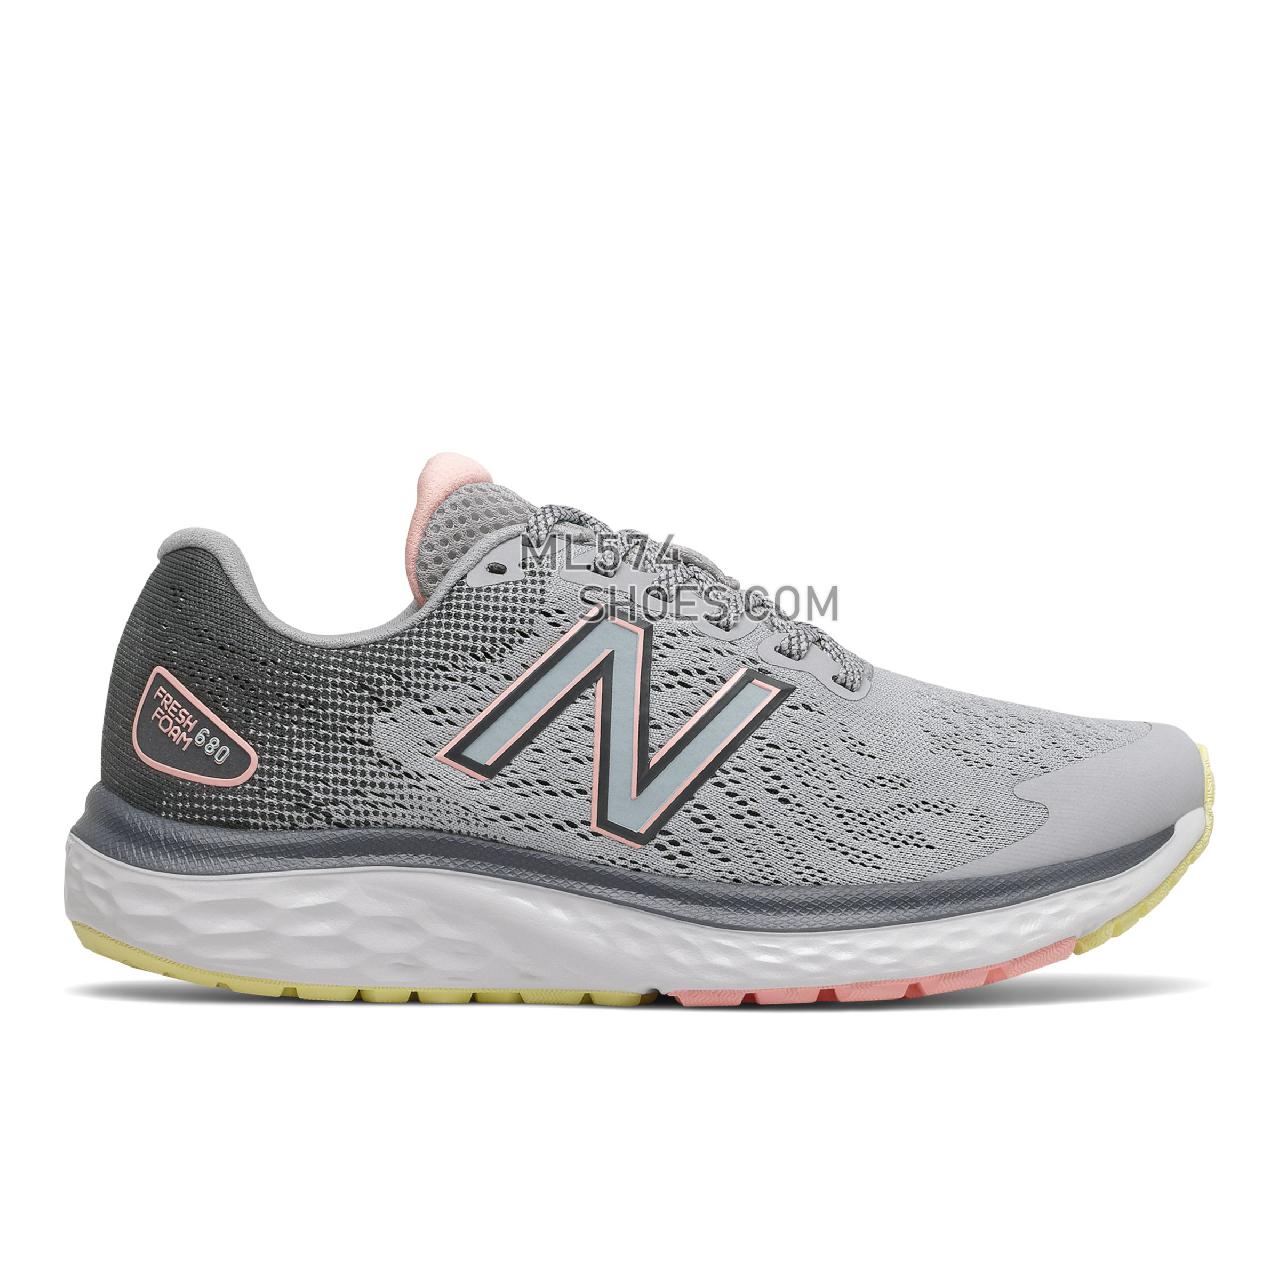 New Balance Fresh Foam 680v7 - Women's Neutral Running - Silver mink with thunder and white mint - W680LG7